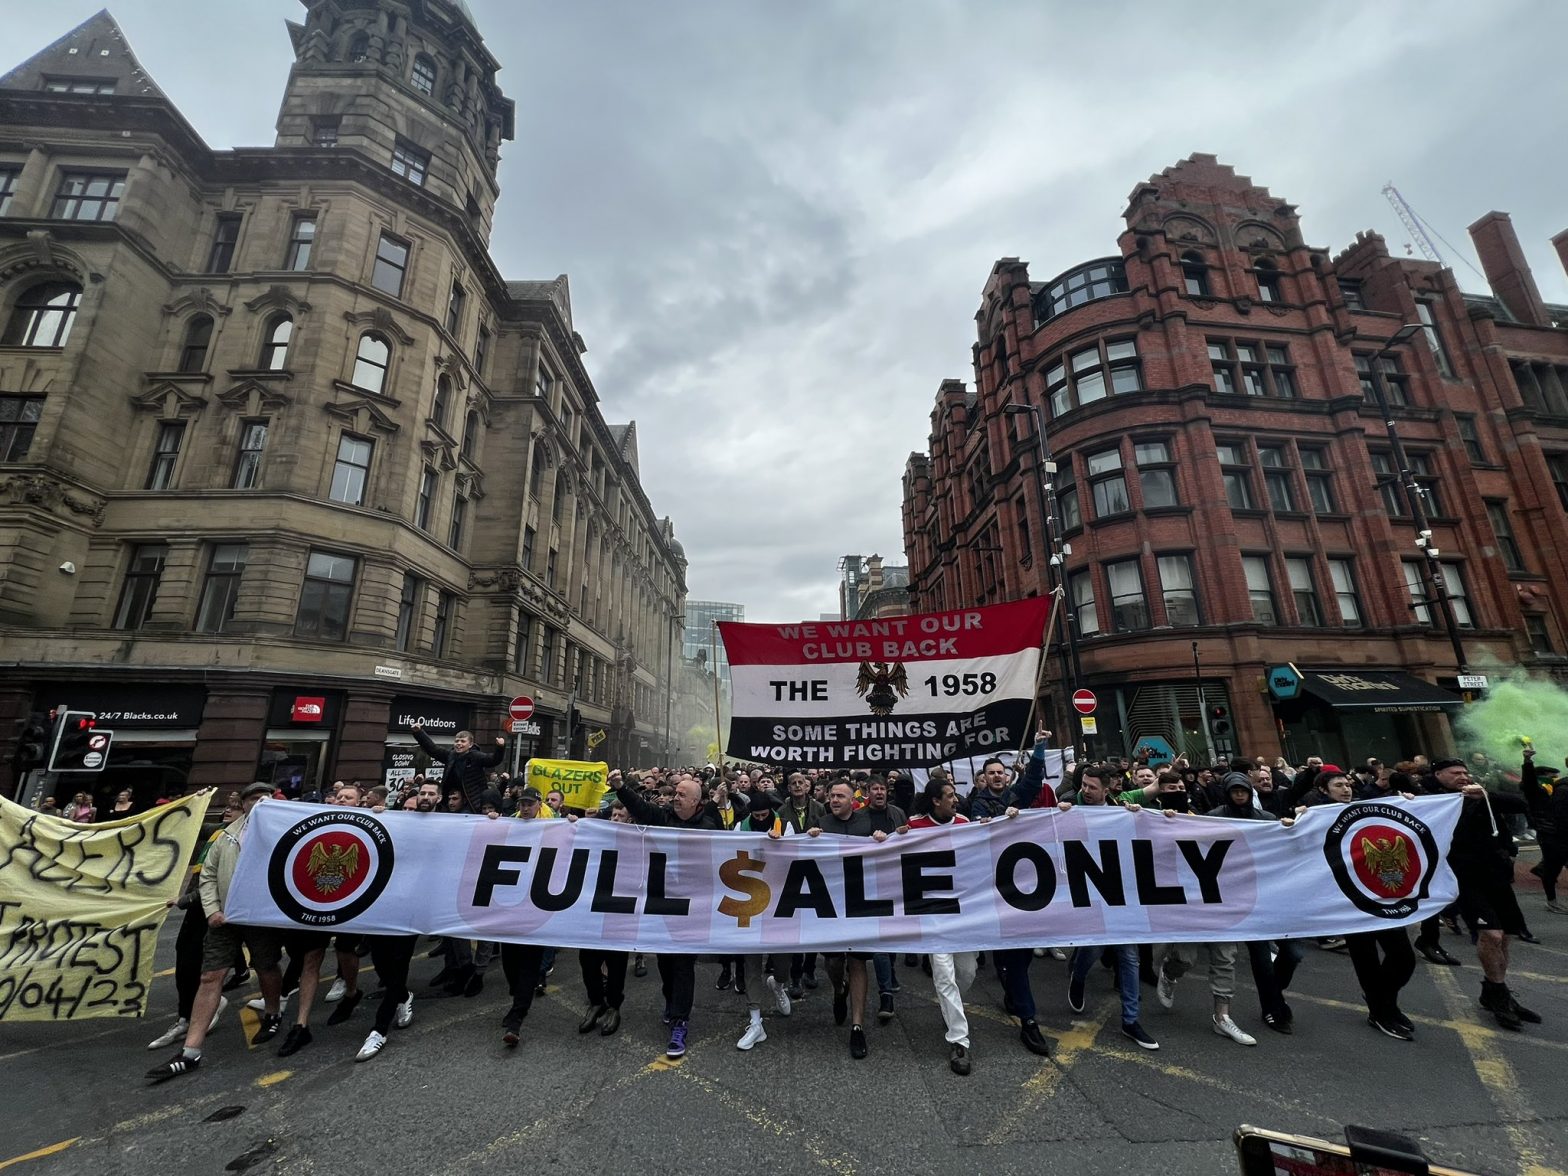 ‘Full Sale Only’: Watch Manchester United fans protest rally ahead of Premier League fixture against Aston Villa